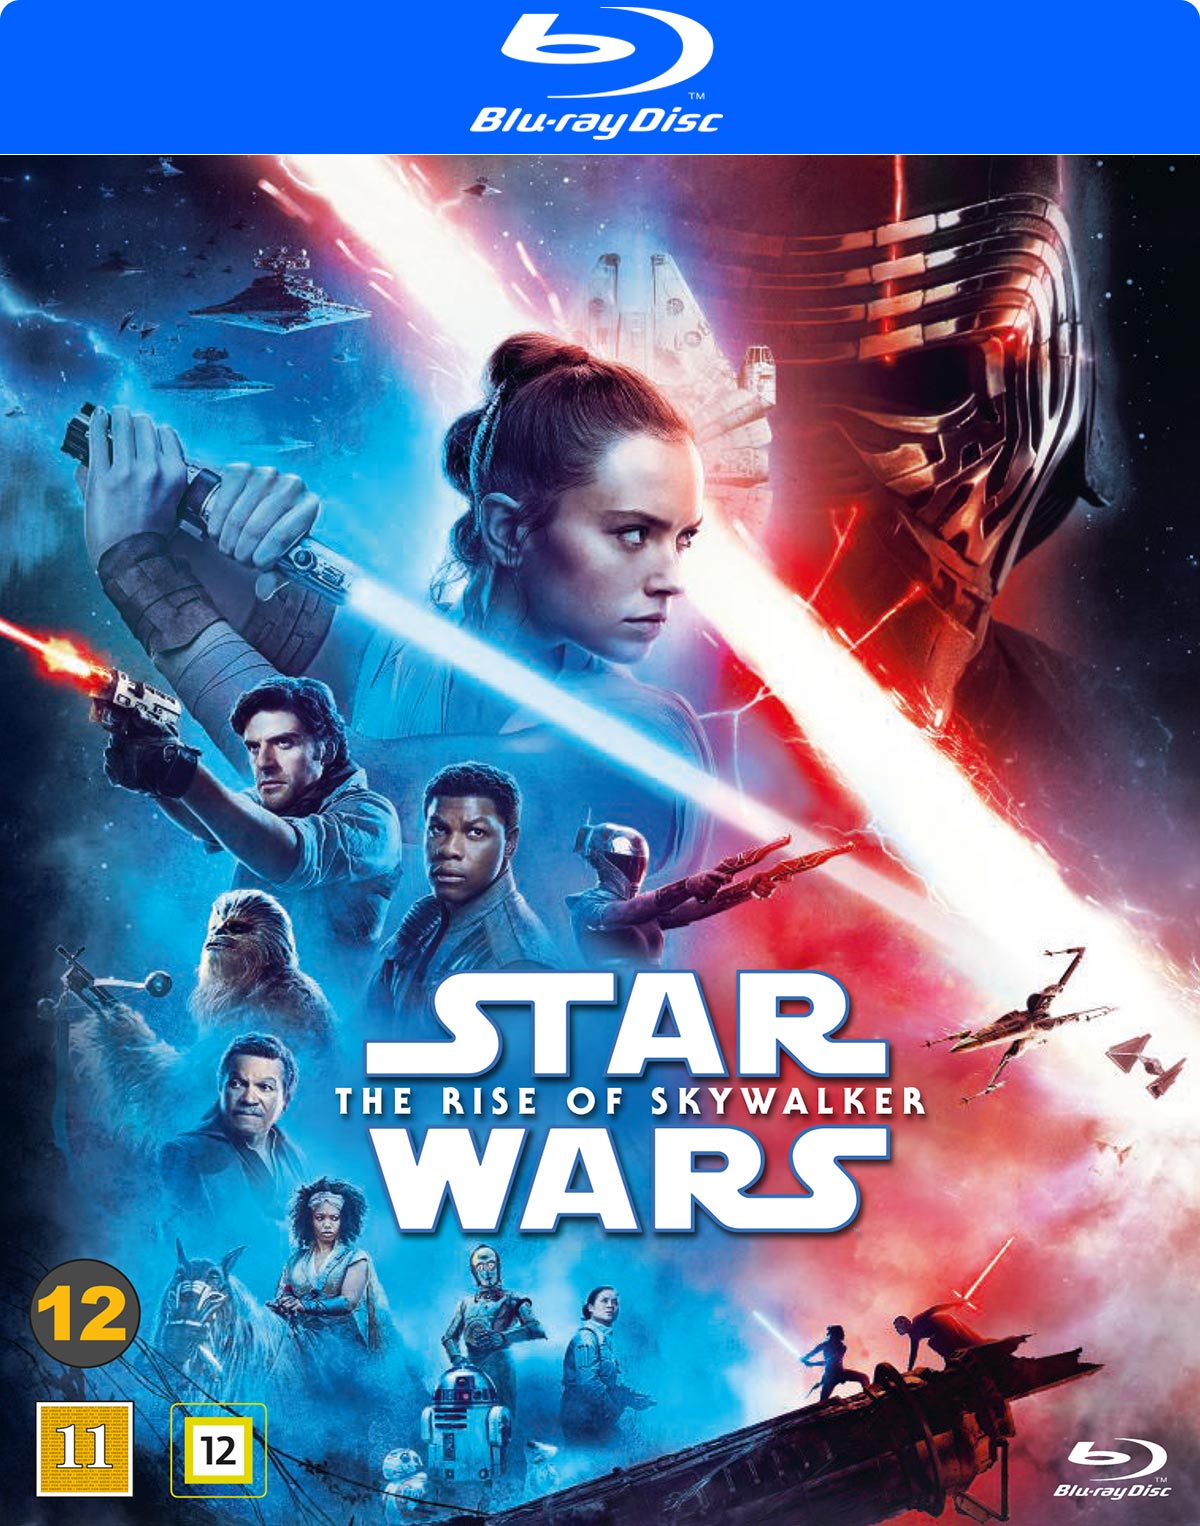 Star Wars 9 - The rise of Skywalker (blu-ray)